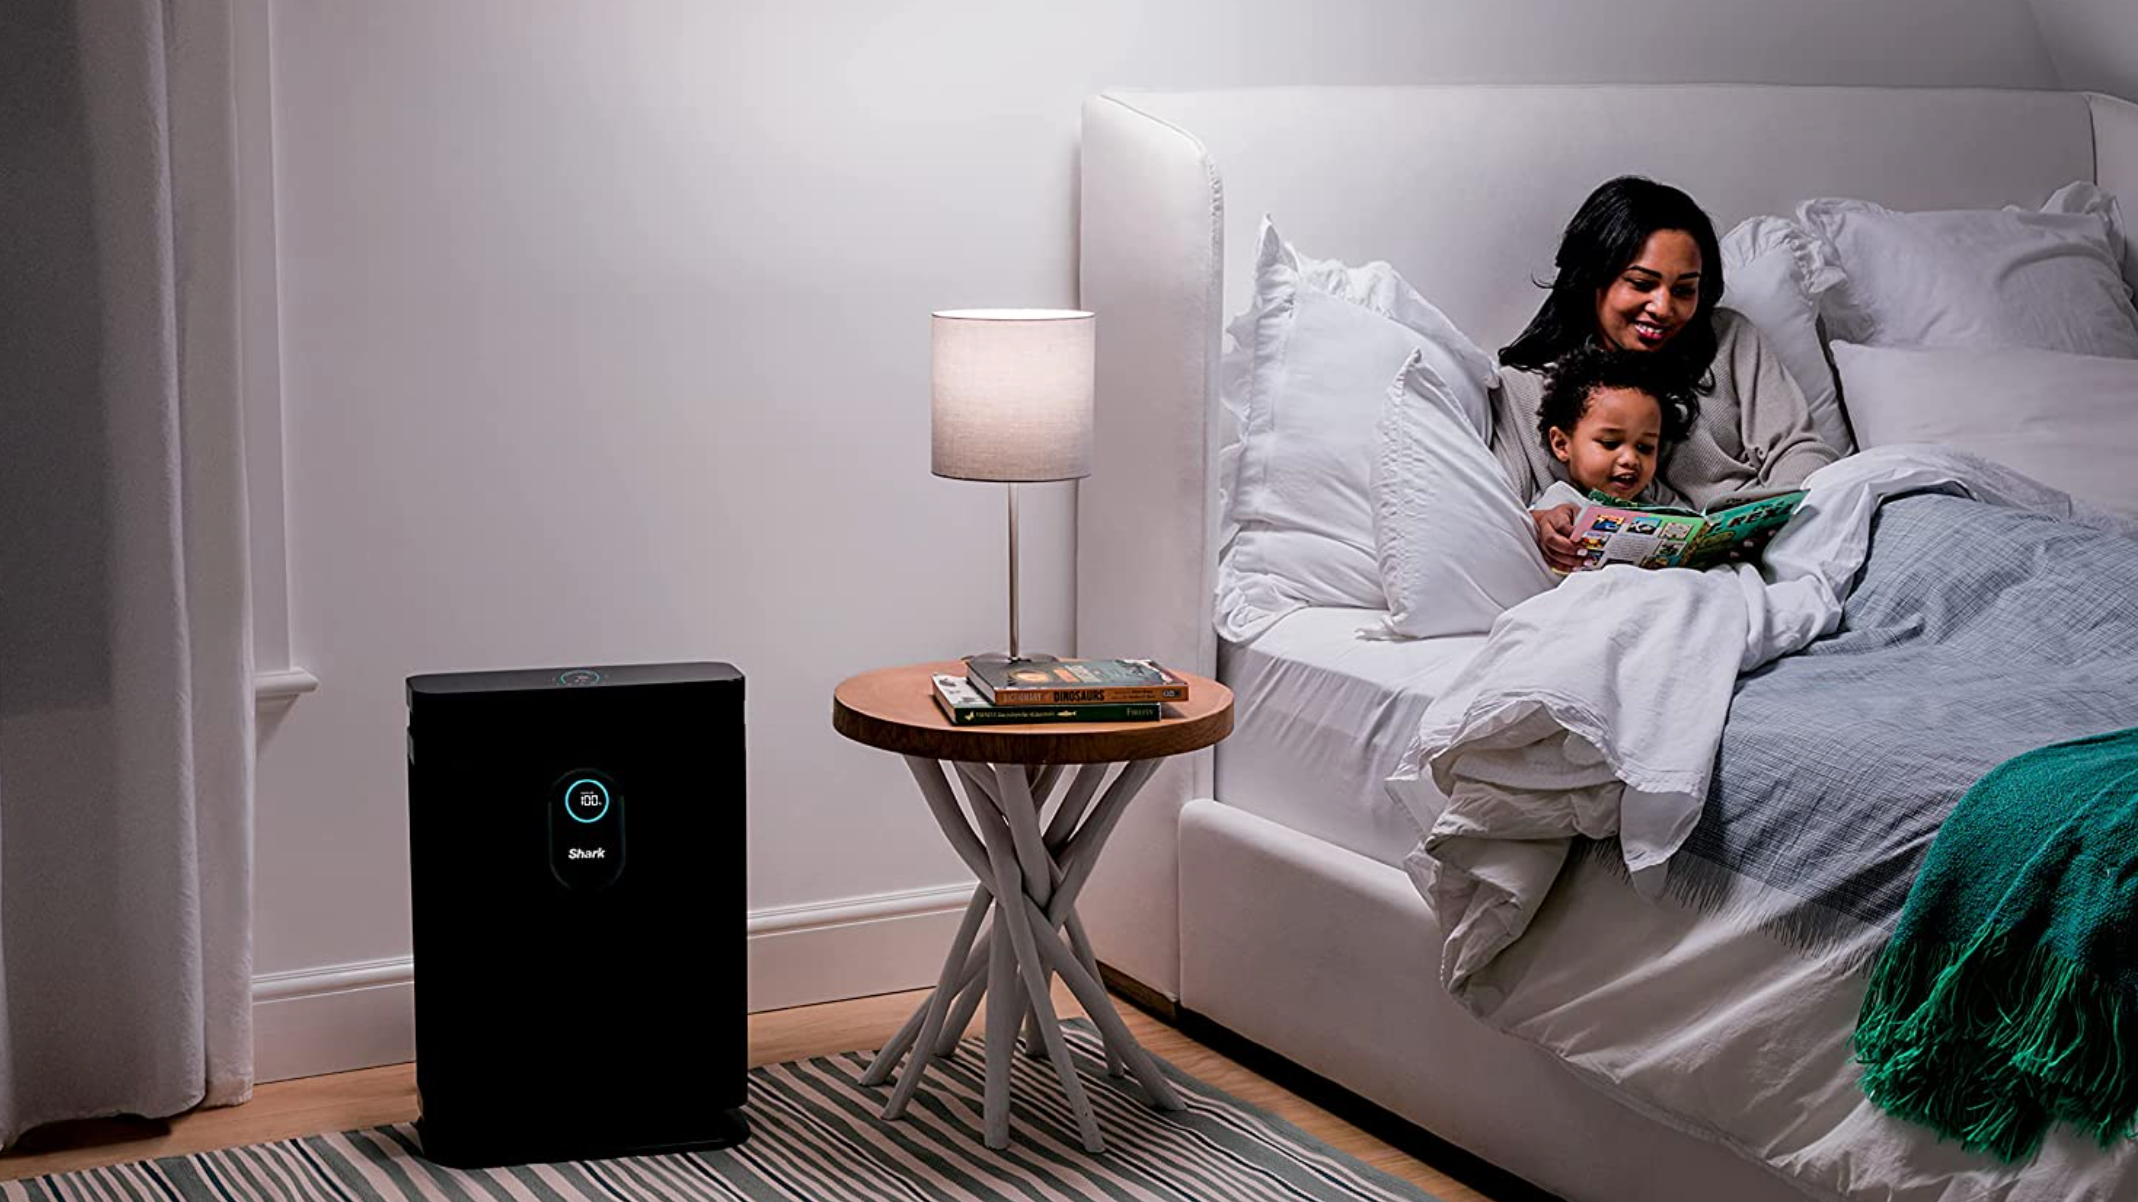 mom reading to son in bedroom, shark air purifier to the left